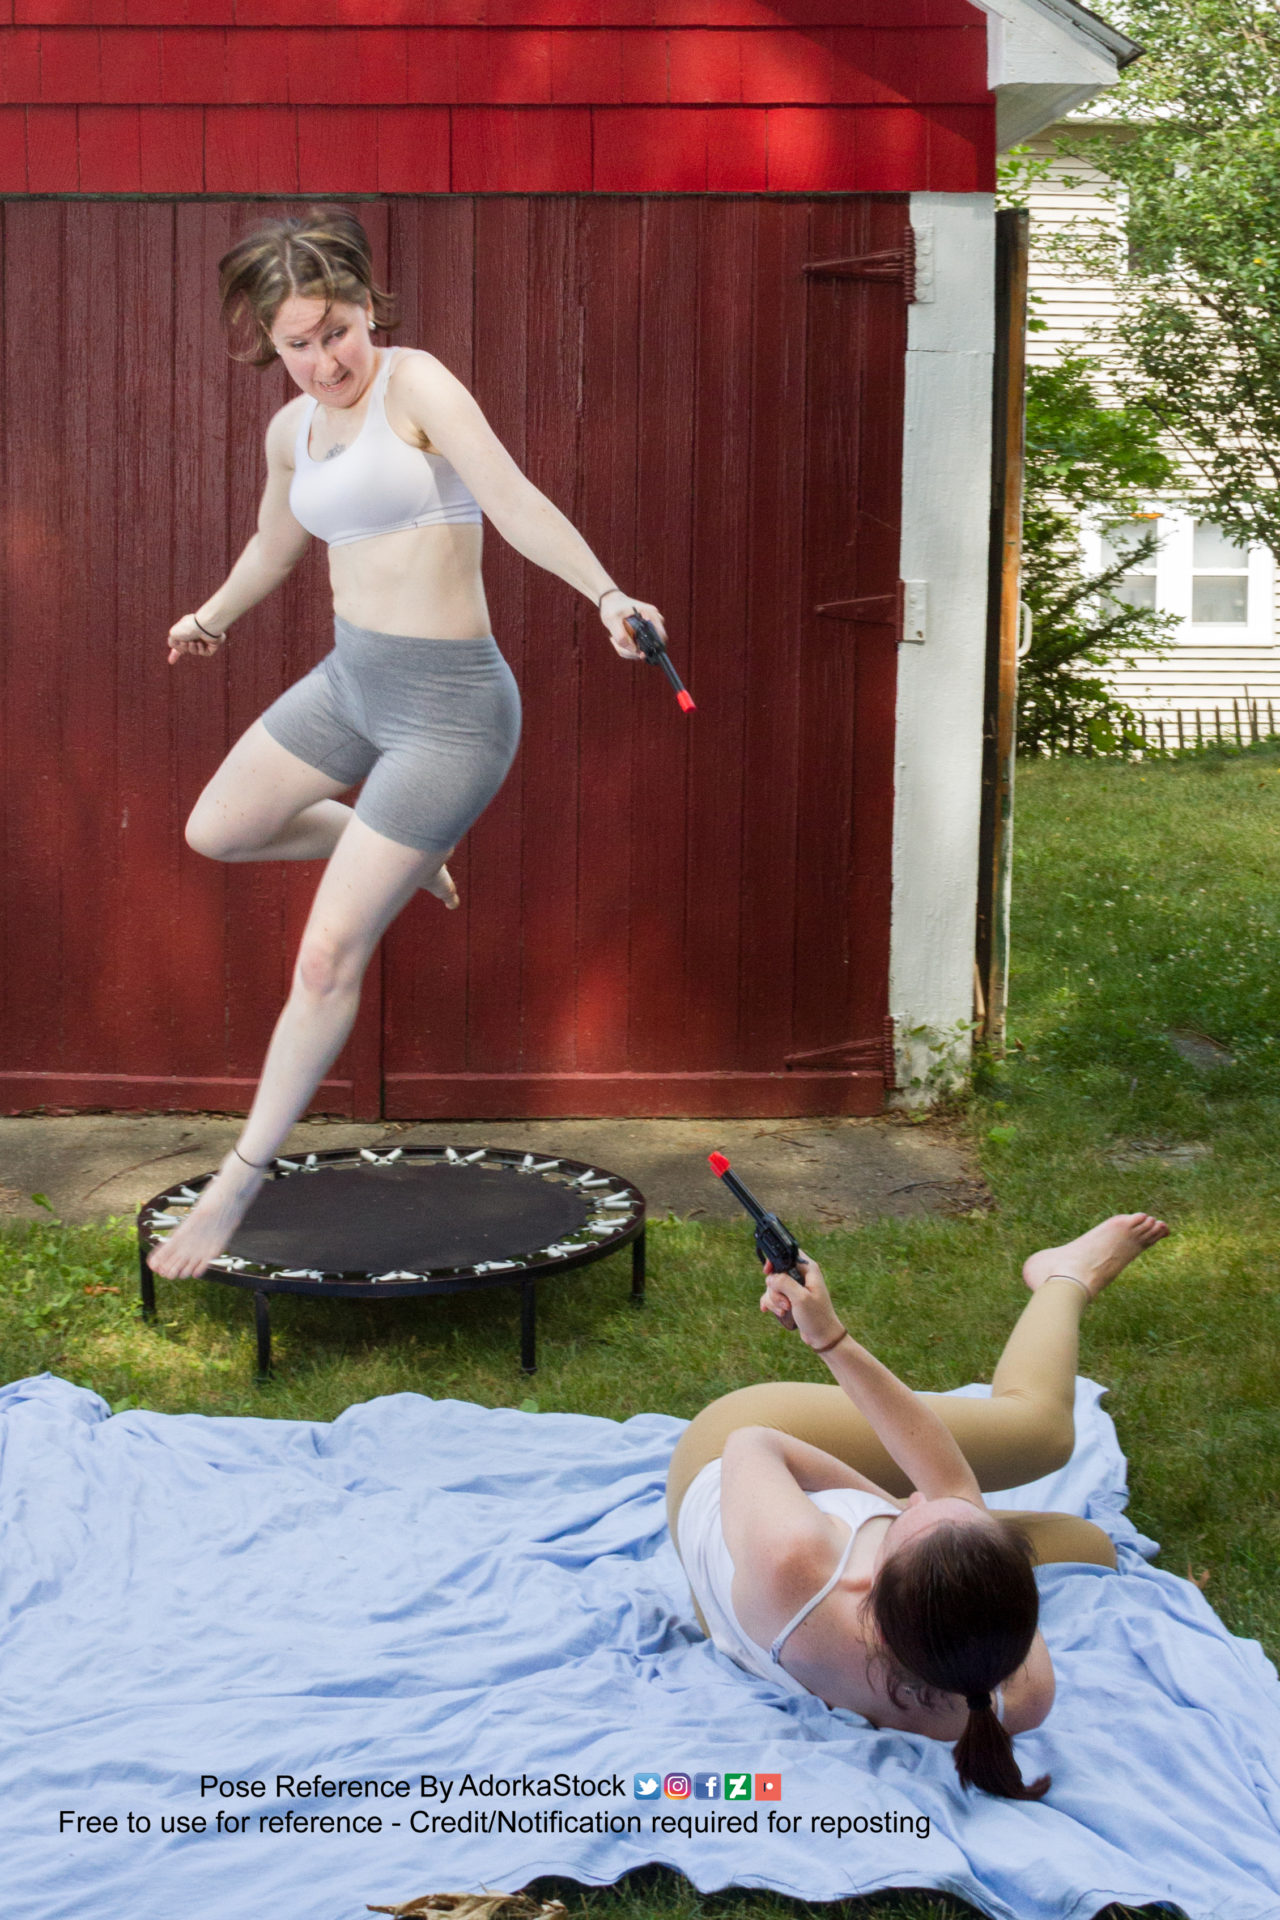 Pose reference photo of two white, female, fit models in form fitting clothing - one is jumping while holding a handgun and the other is rolling across the ground also with a hand gun as if they're in a firefight